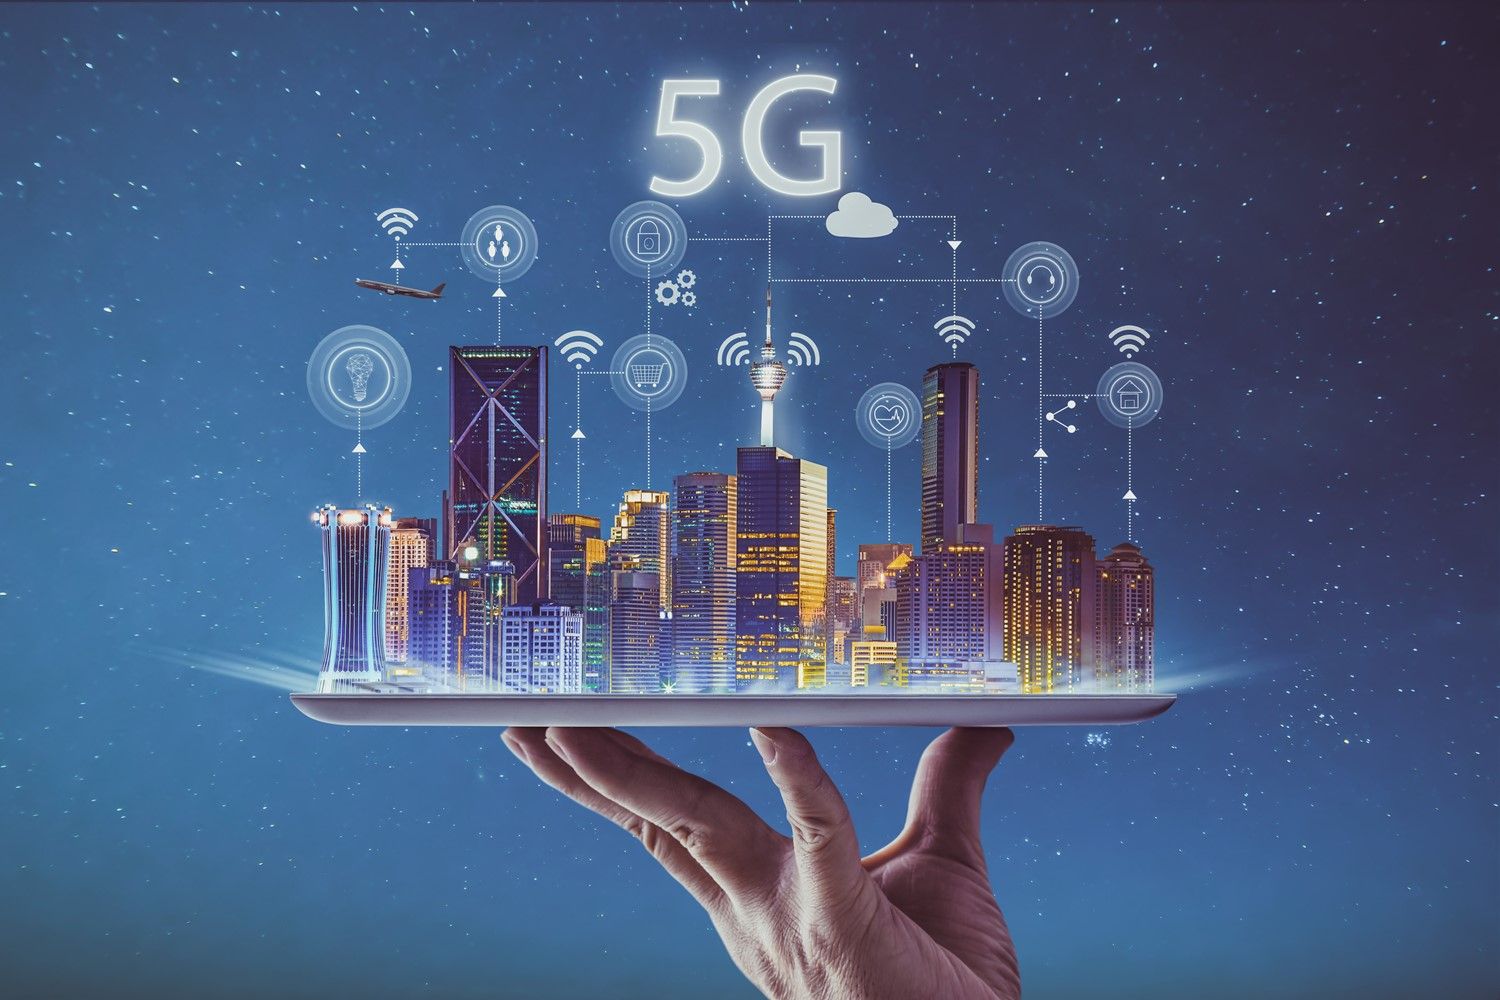 How Is IoT Connected With 5G